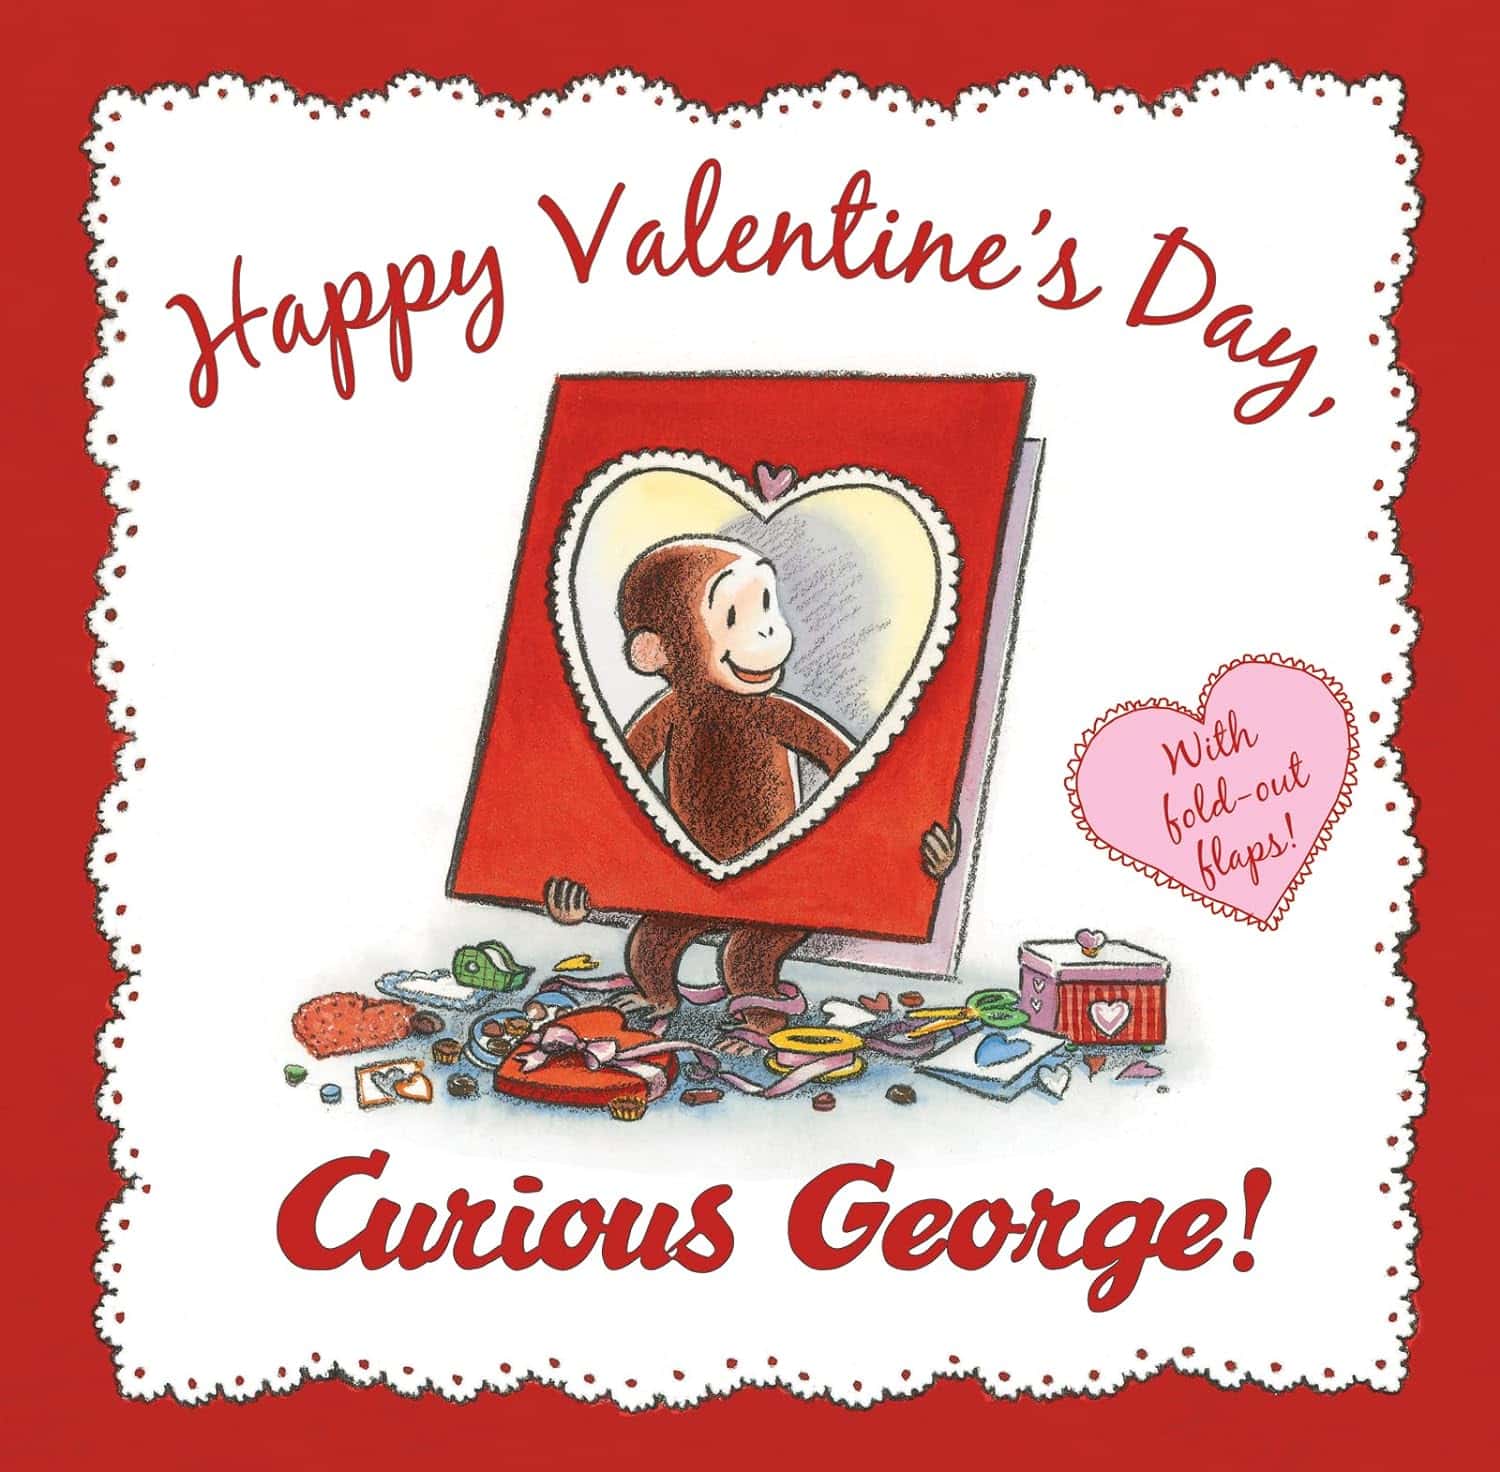 "Happy Valentine's Day, Curious George!" by N. Di Angelo